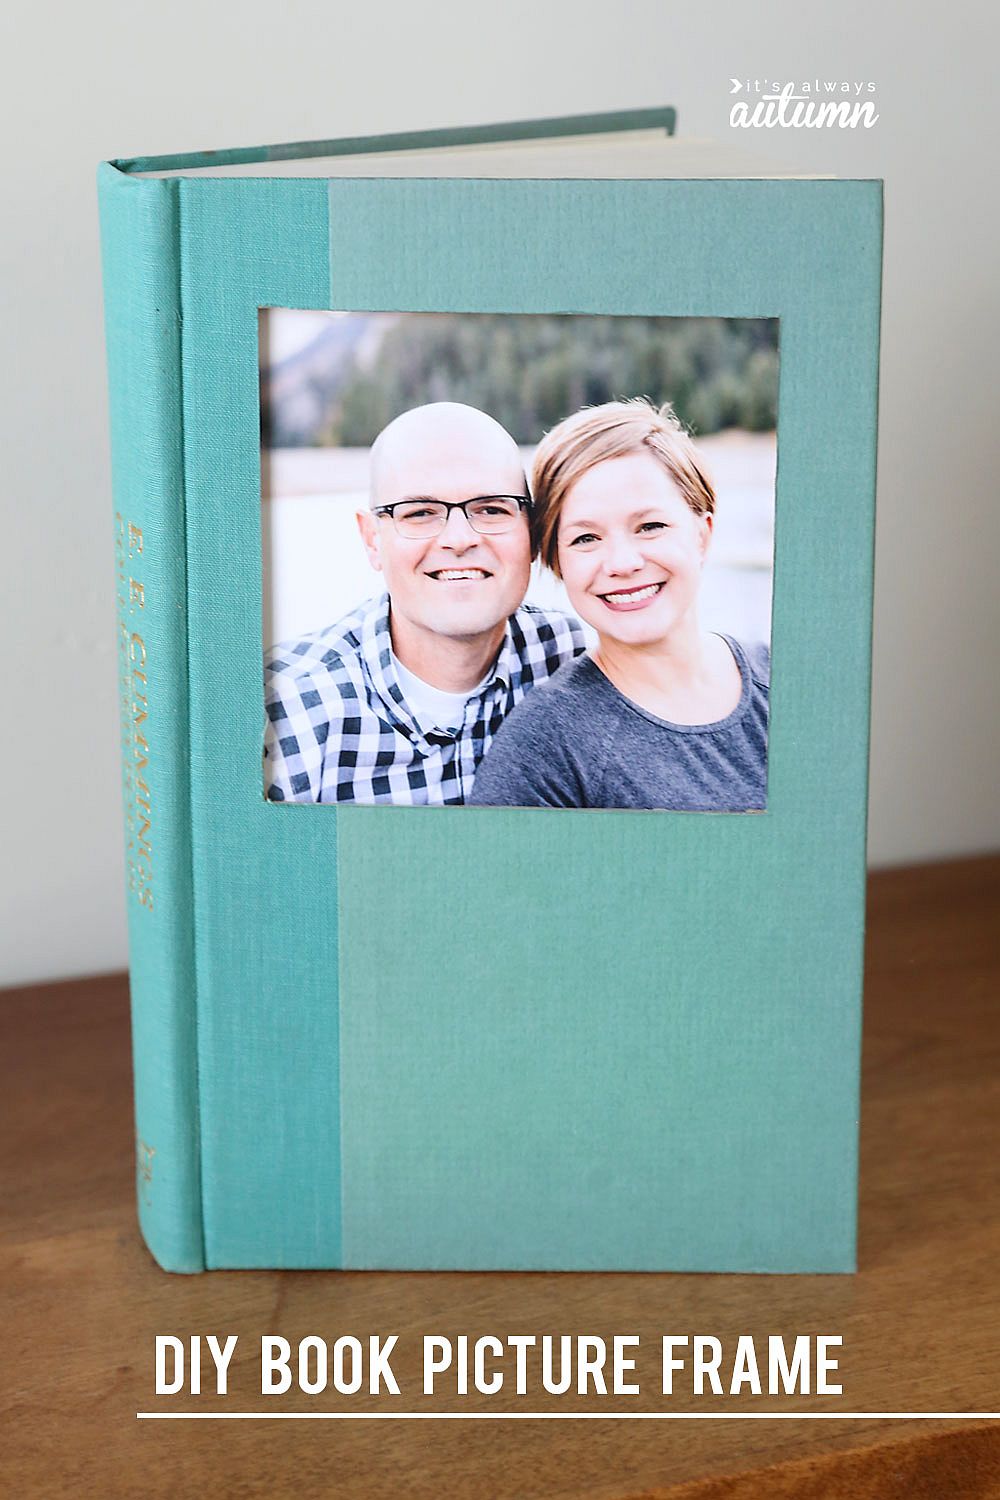 Easy to craft DIY book picture frame idea